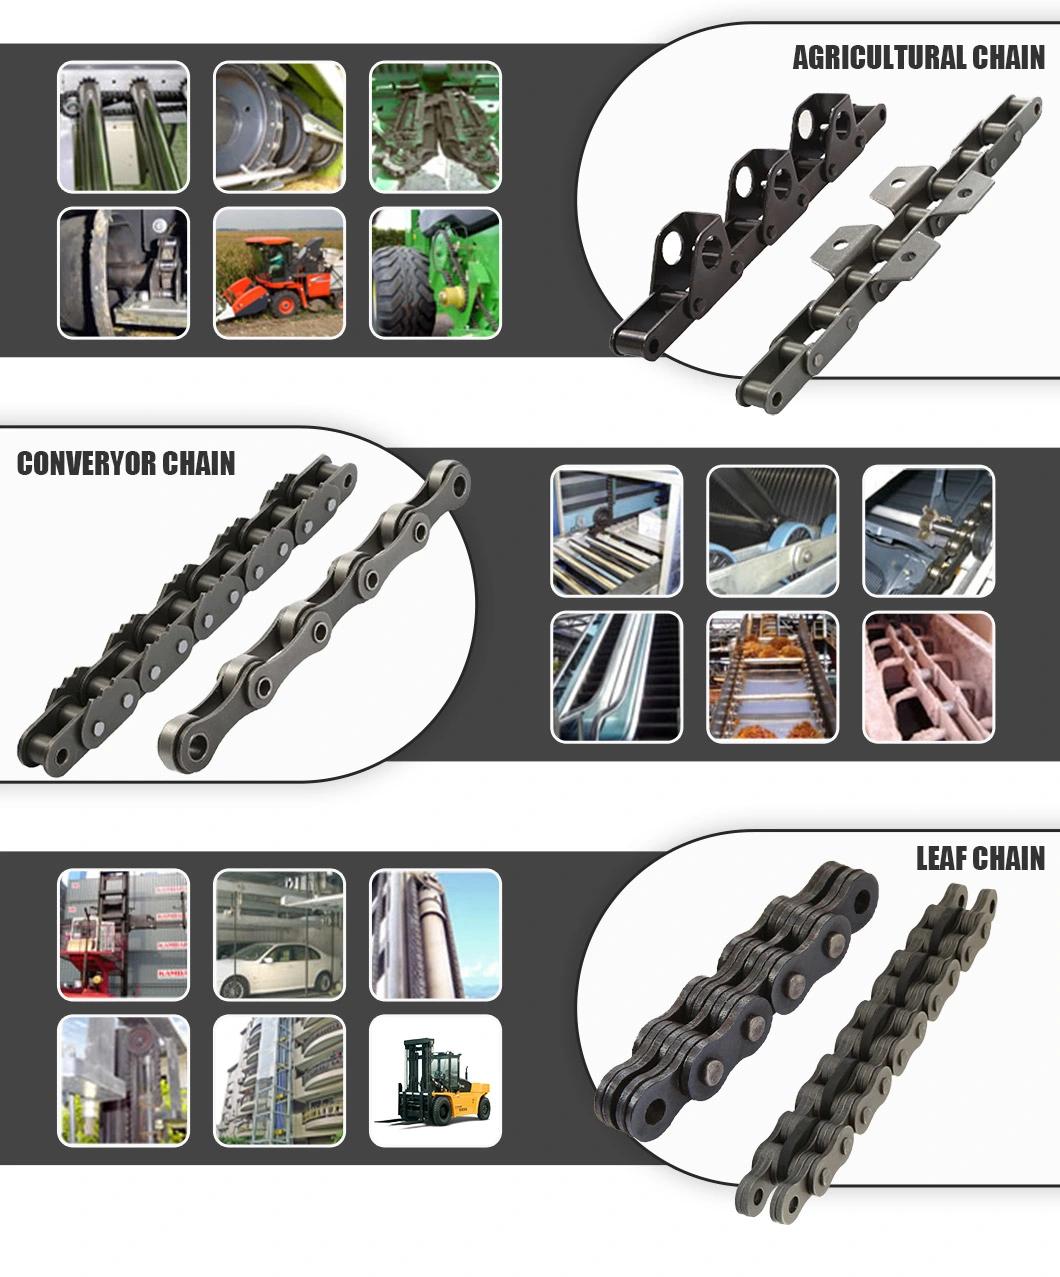 Stainless Steel Agricultural Chain for John Deere Corn Harvest Machine